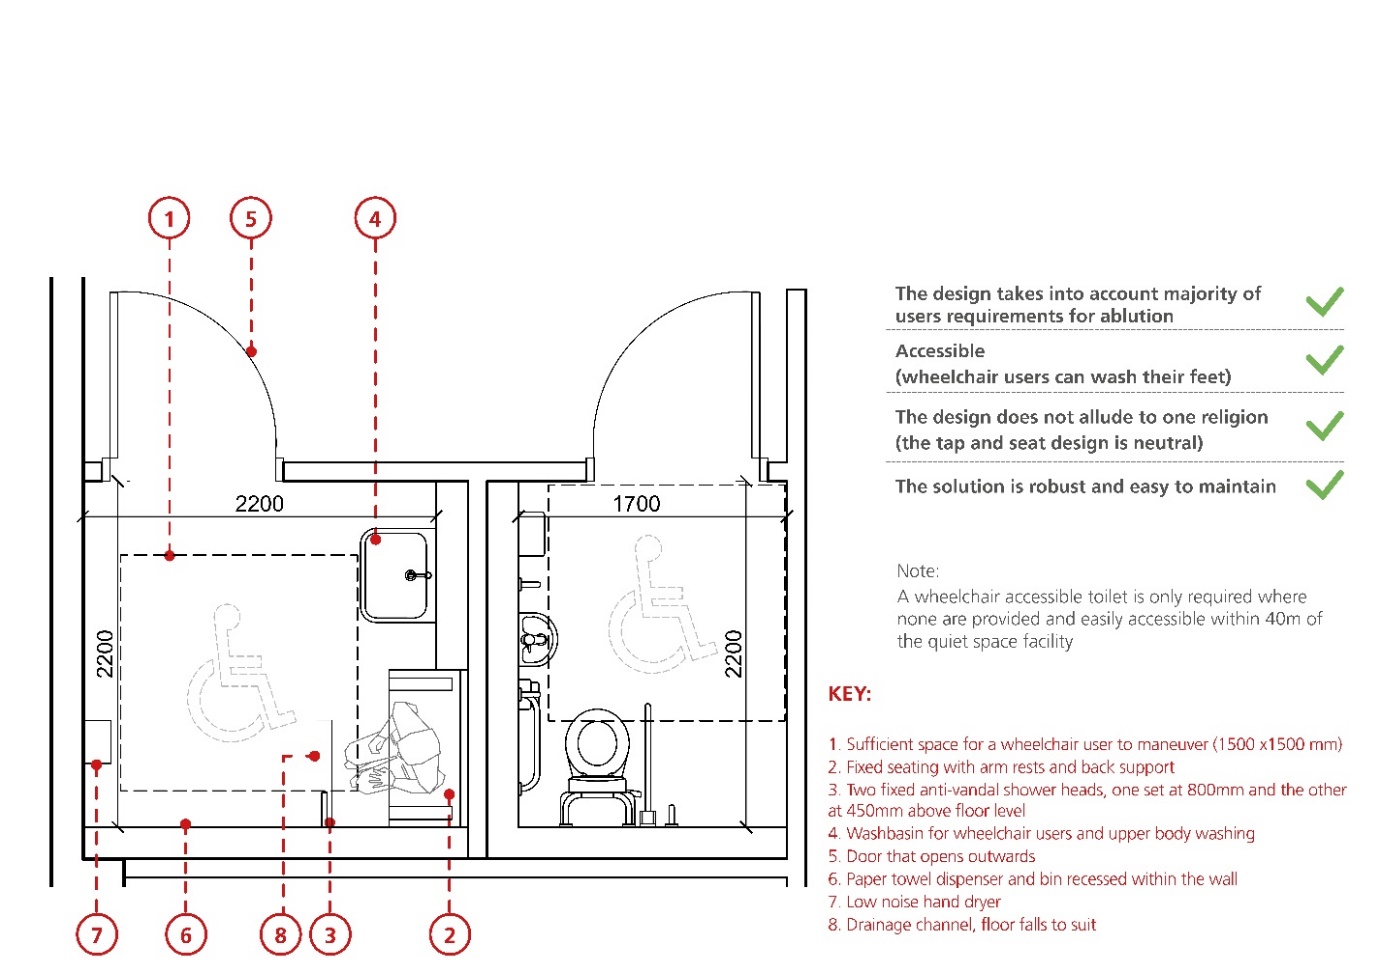 Diagram  showing layout of unisex ablution facility and wheelchair accessible toilet 